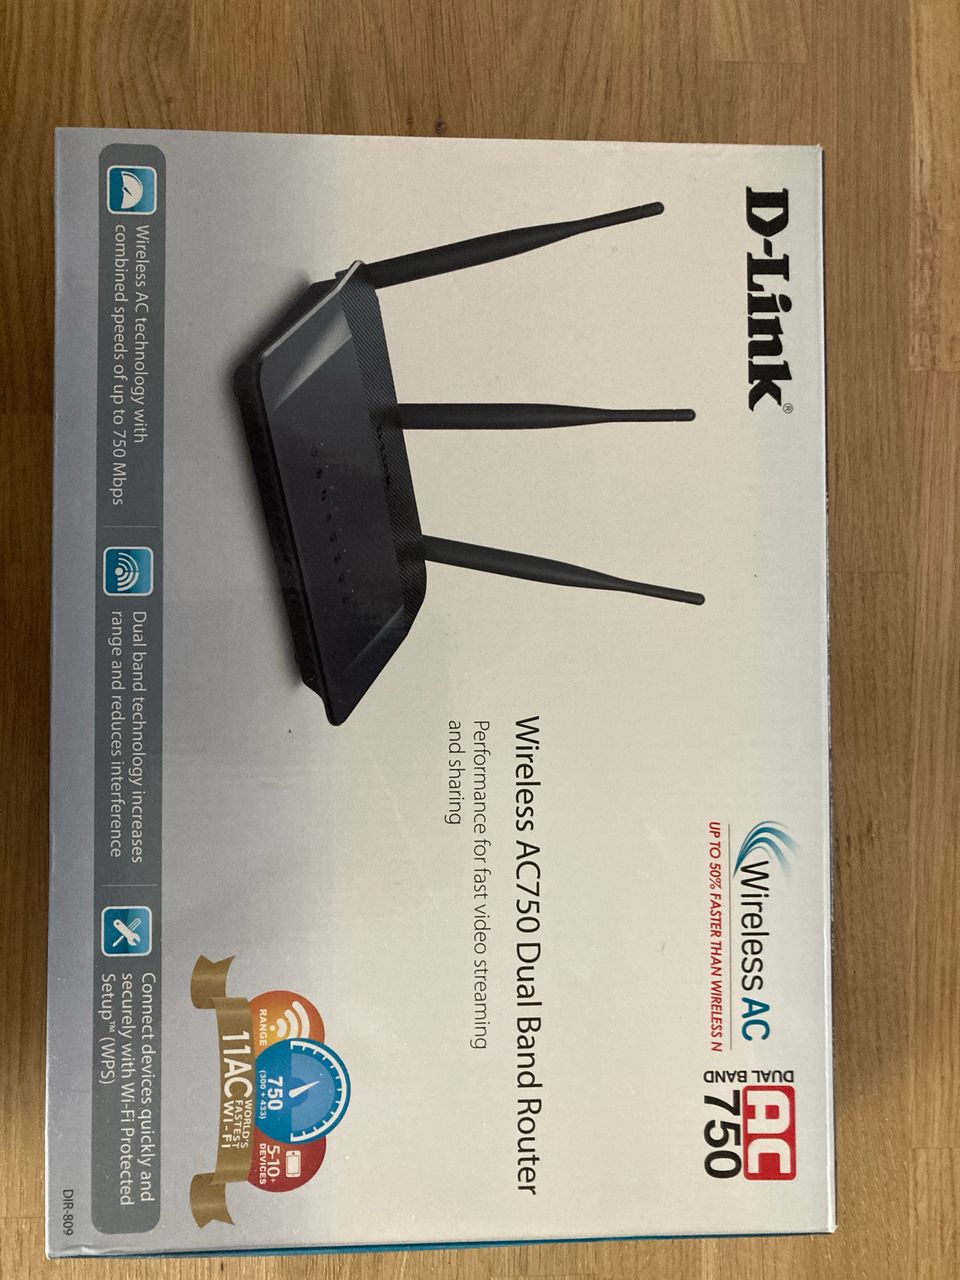 Reititin, D-Link AC750 Dual Band Router